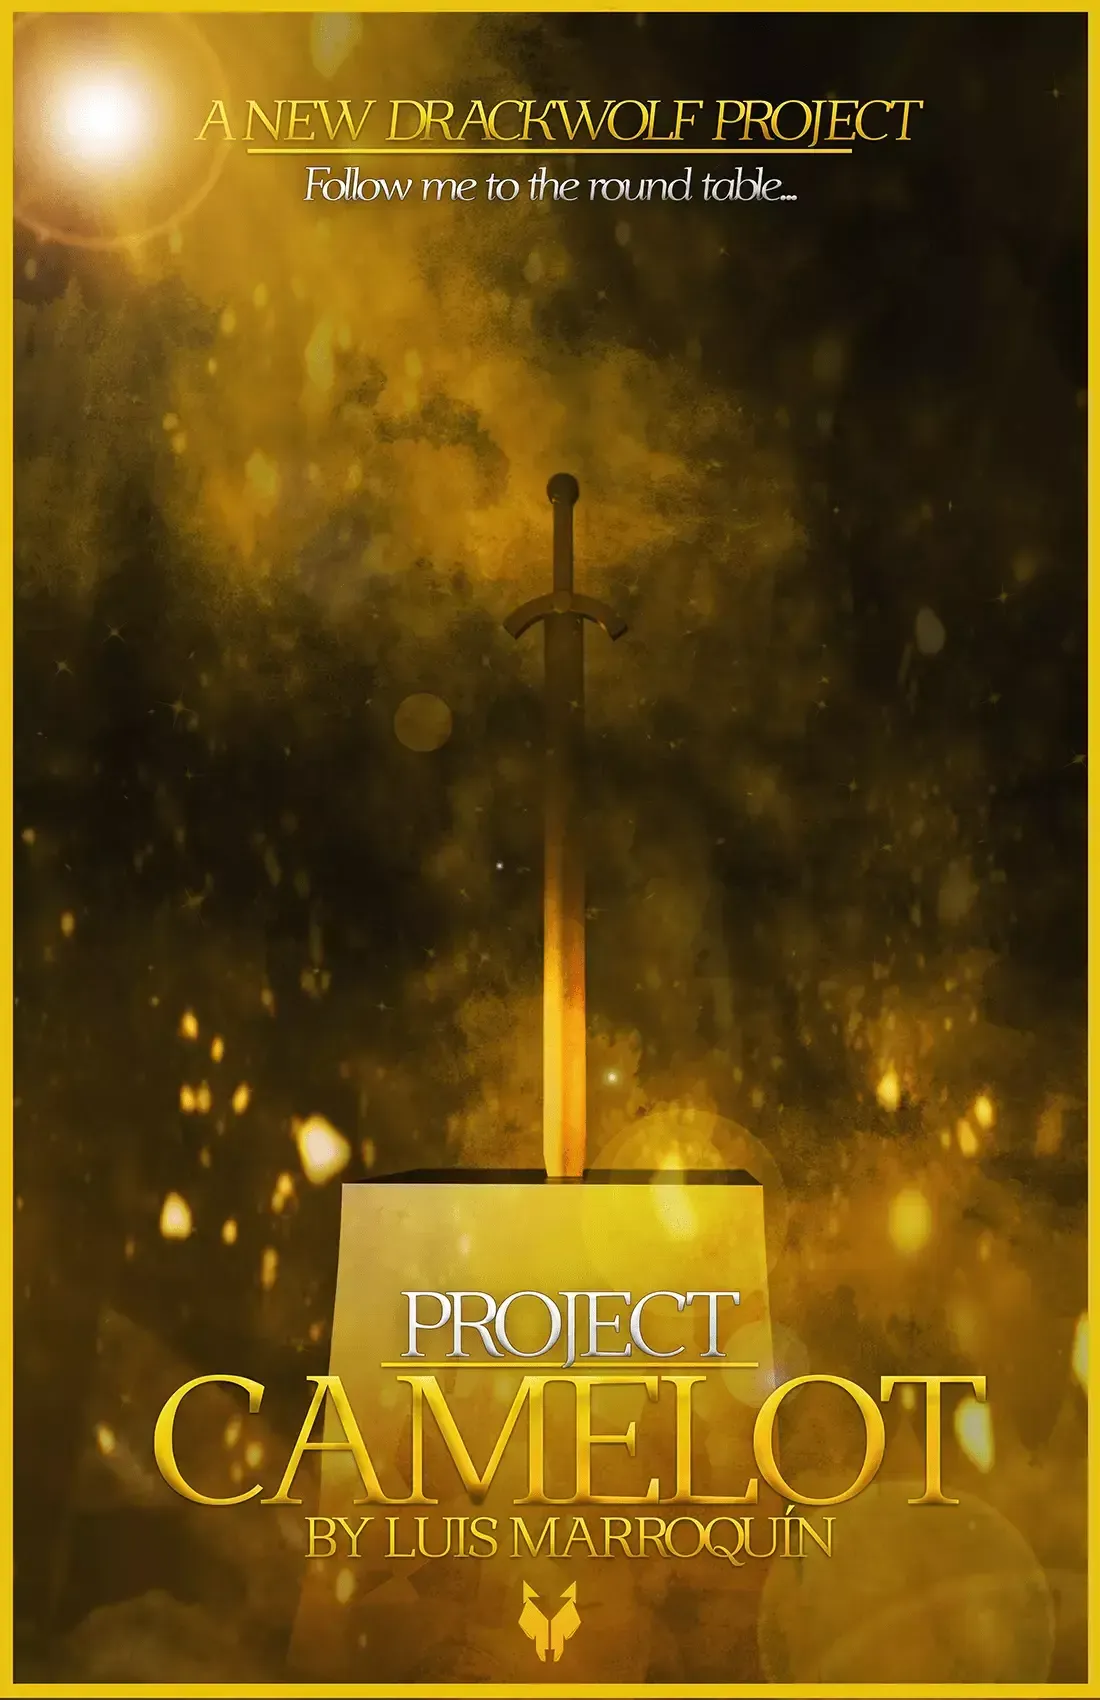 Poster Camelot